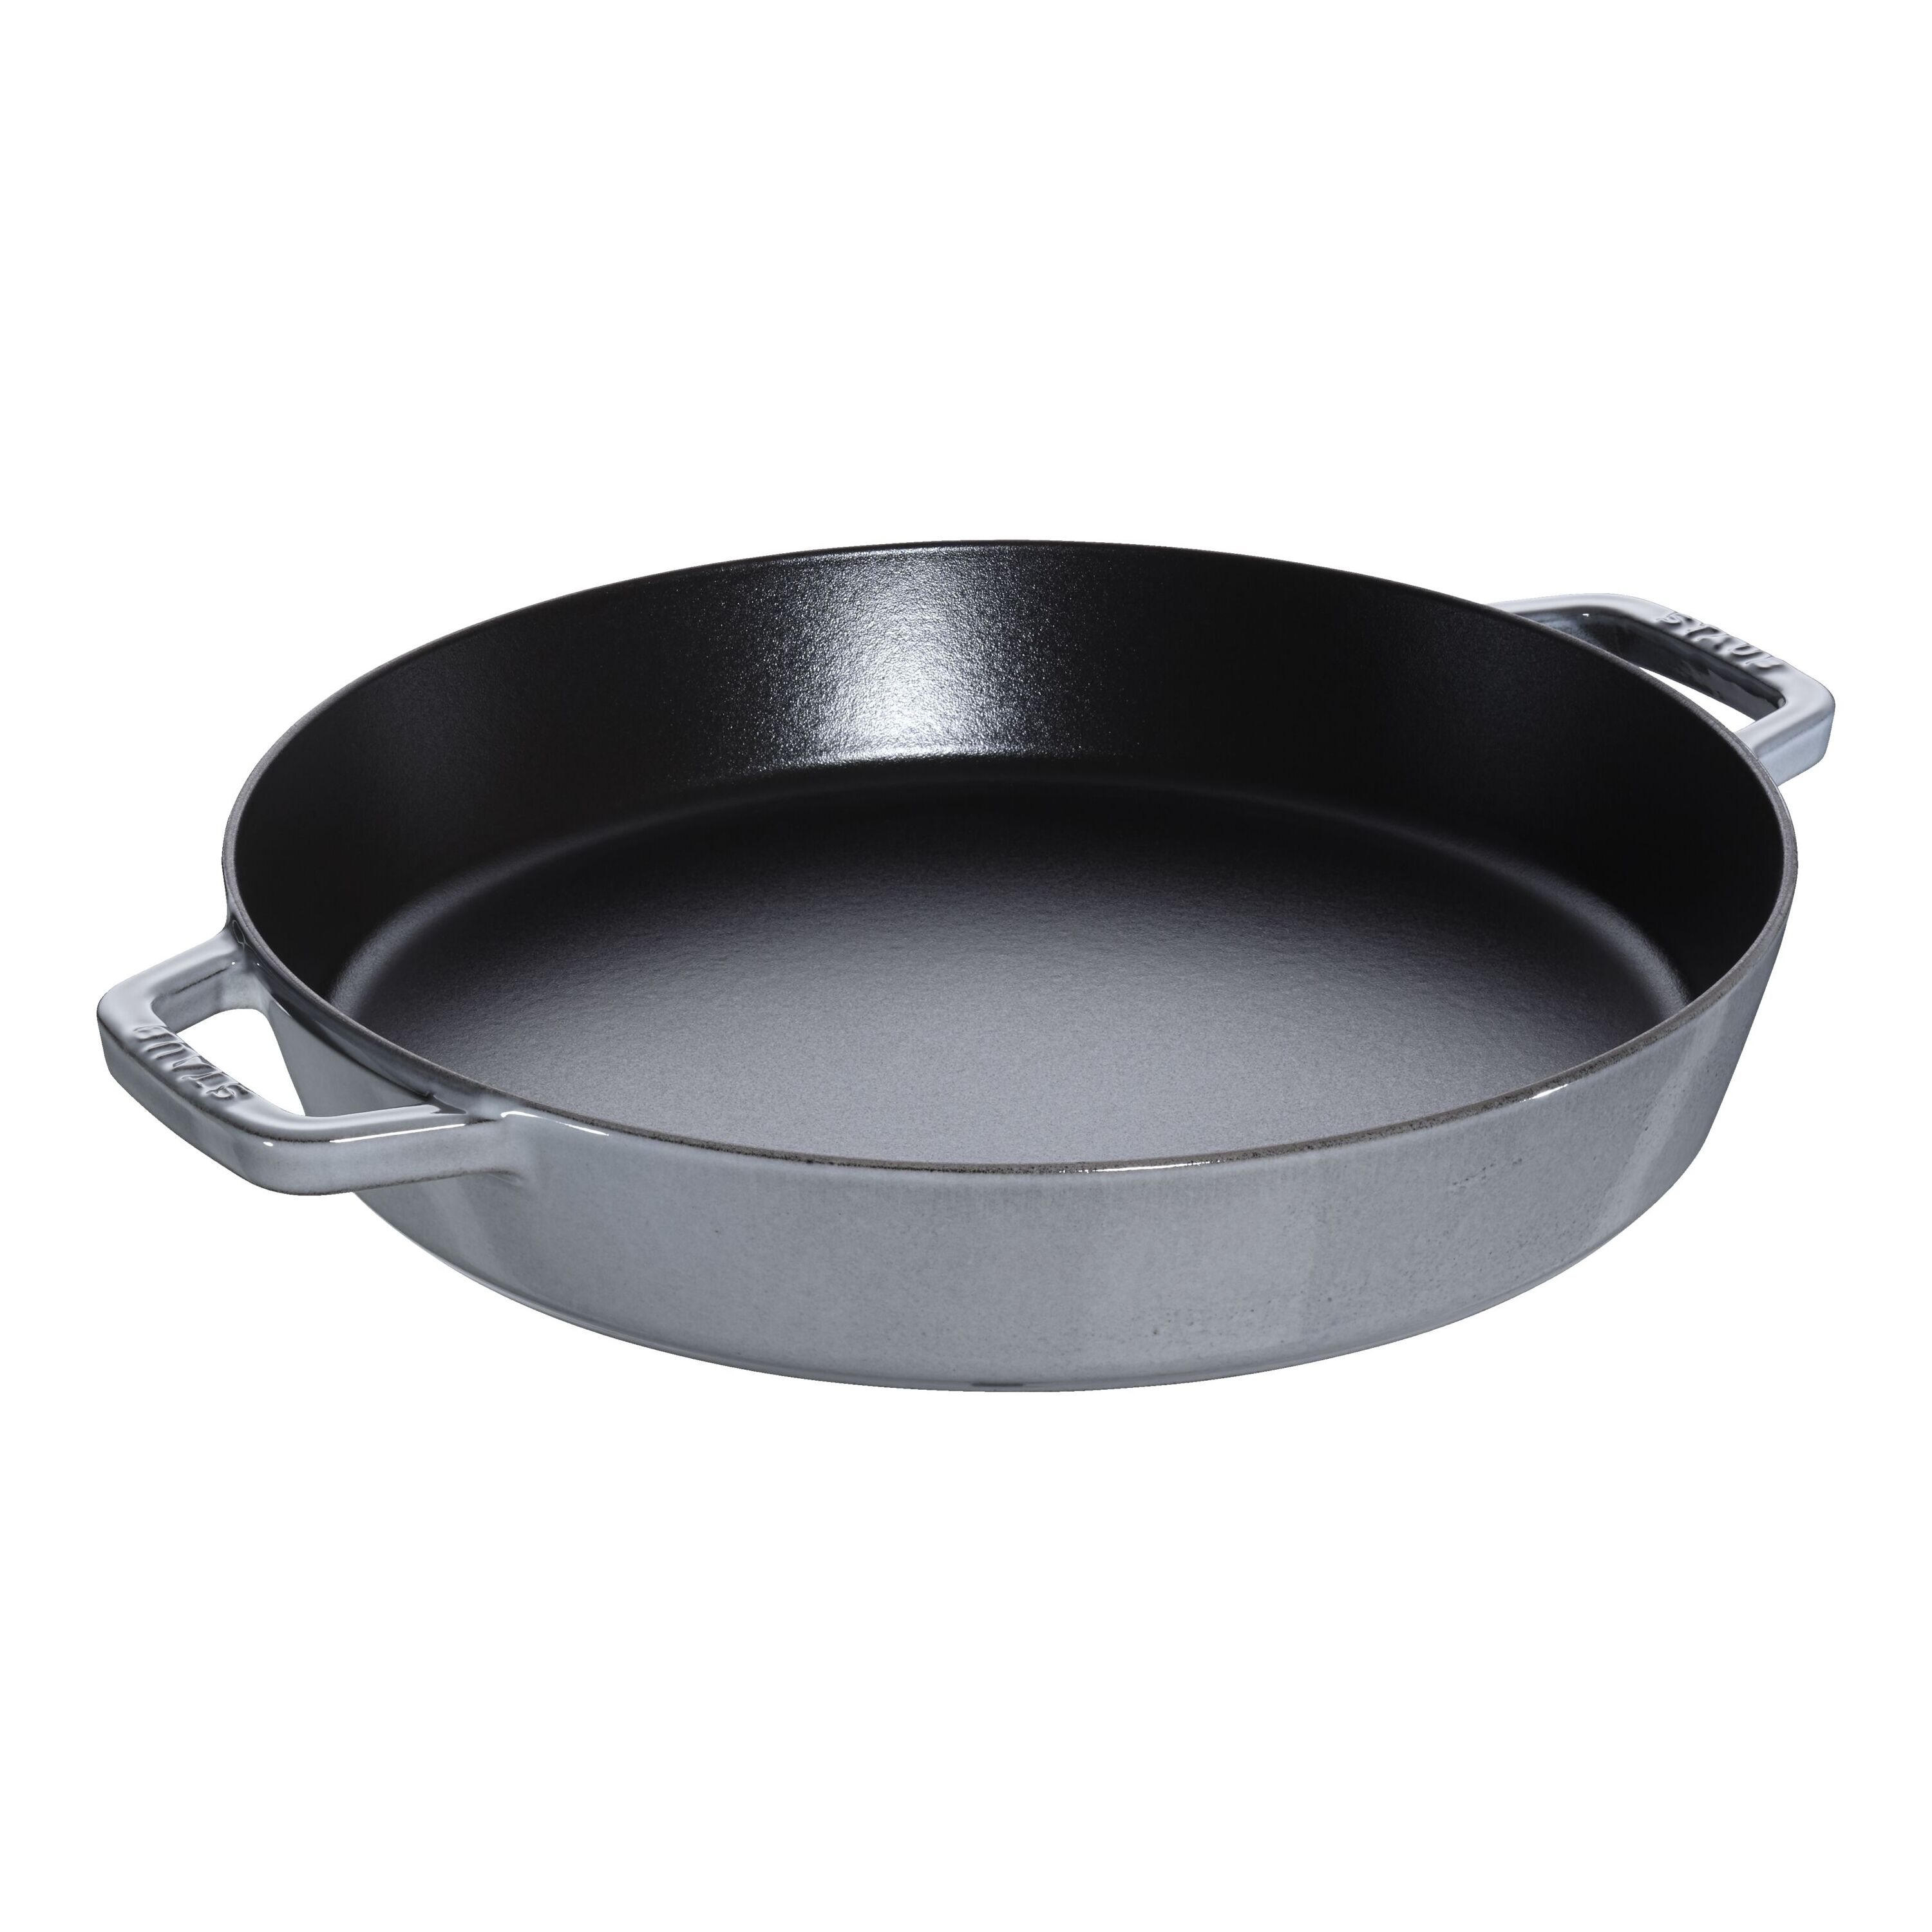 by 13 Inch Nonstick Cast Iron Dual Handle Pan, Ceramic Coated Frying Pan,  Blue Baking tray